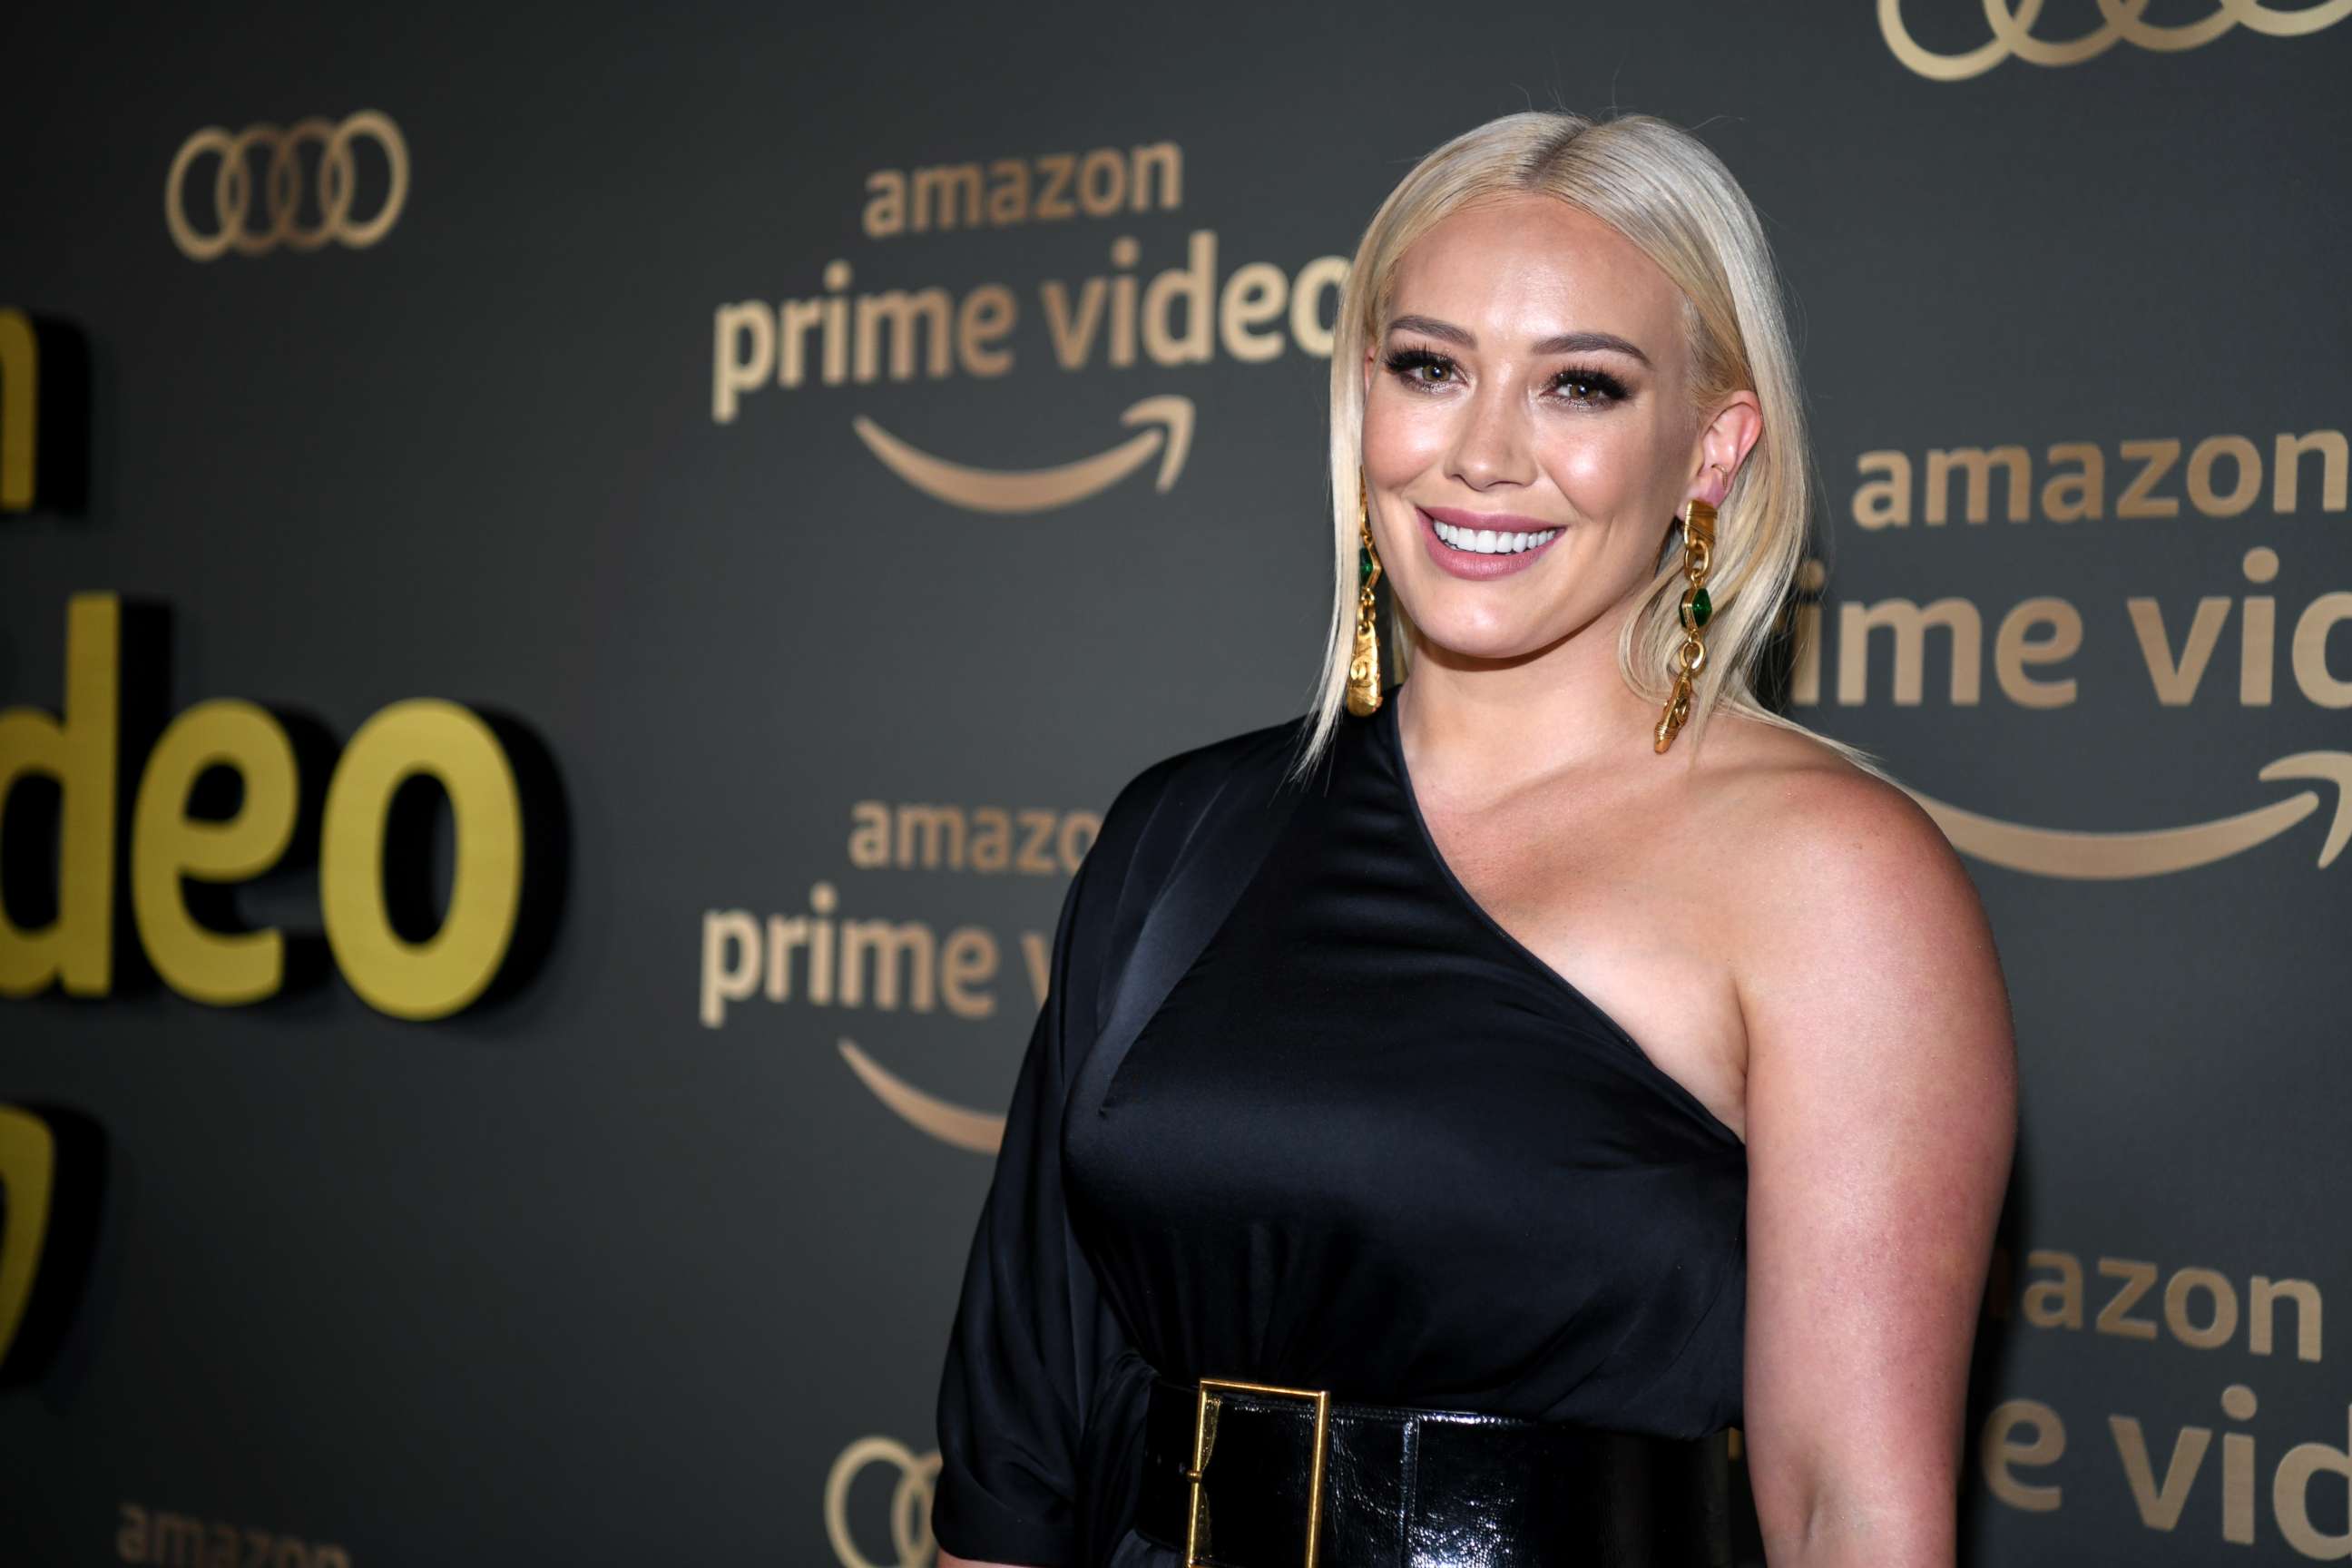 PHOTO: Hilary Duff arrives at Amazon Prime Video's Golden Globe Awards After Party at The Beverly Hilton Hotel, Jan. 06, 2019, in Beverly Hills, Calif.